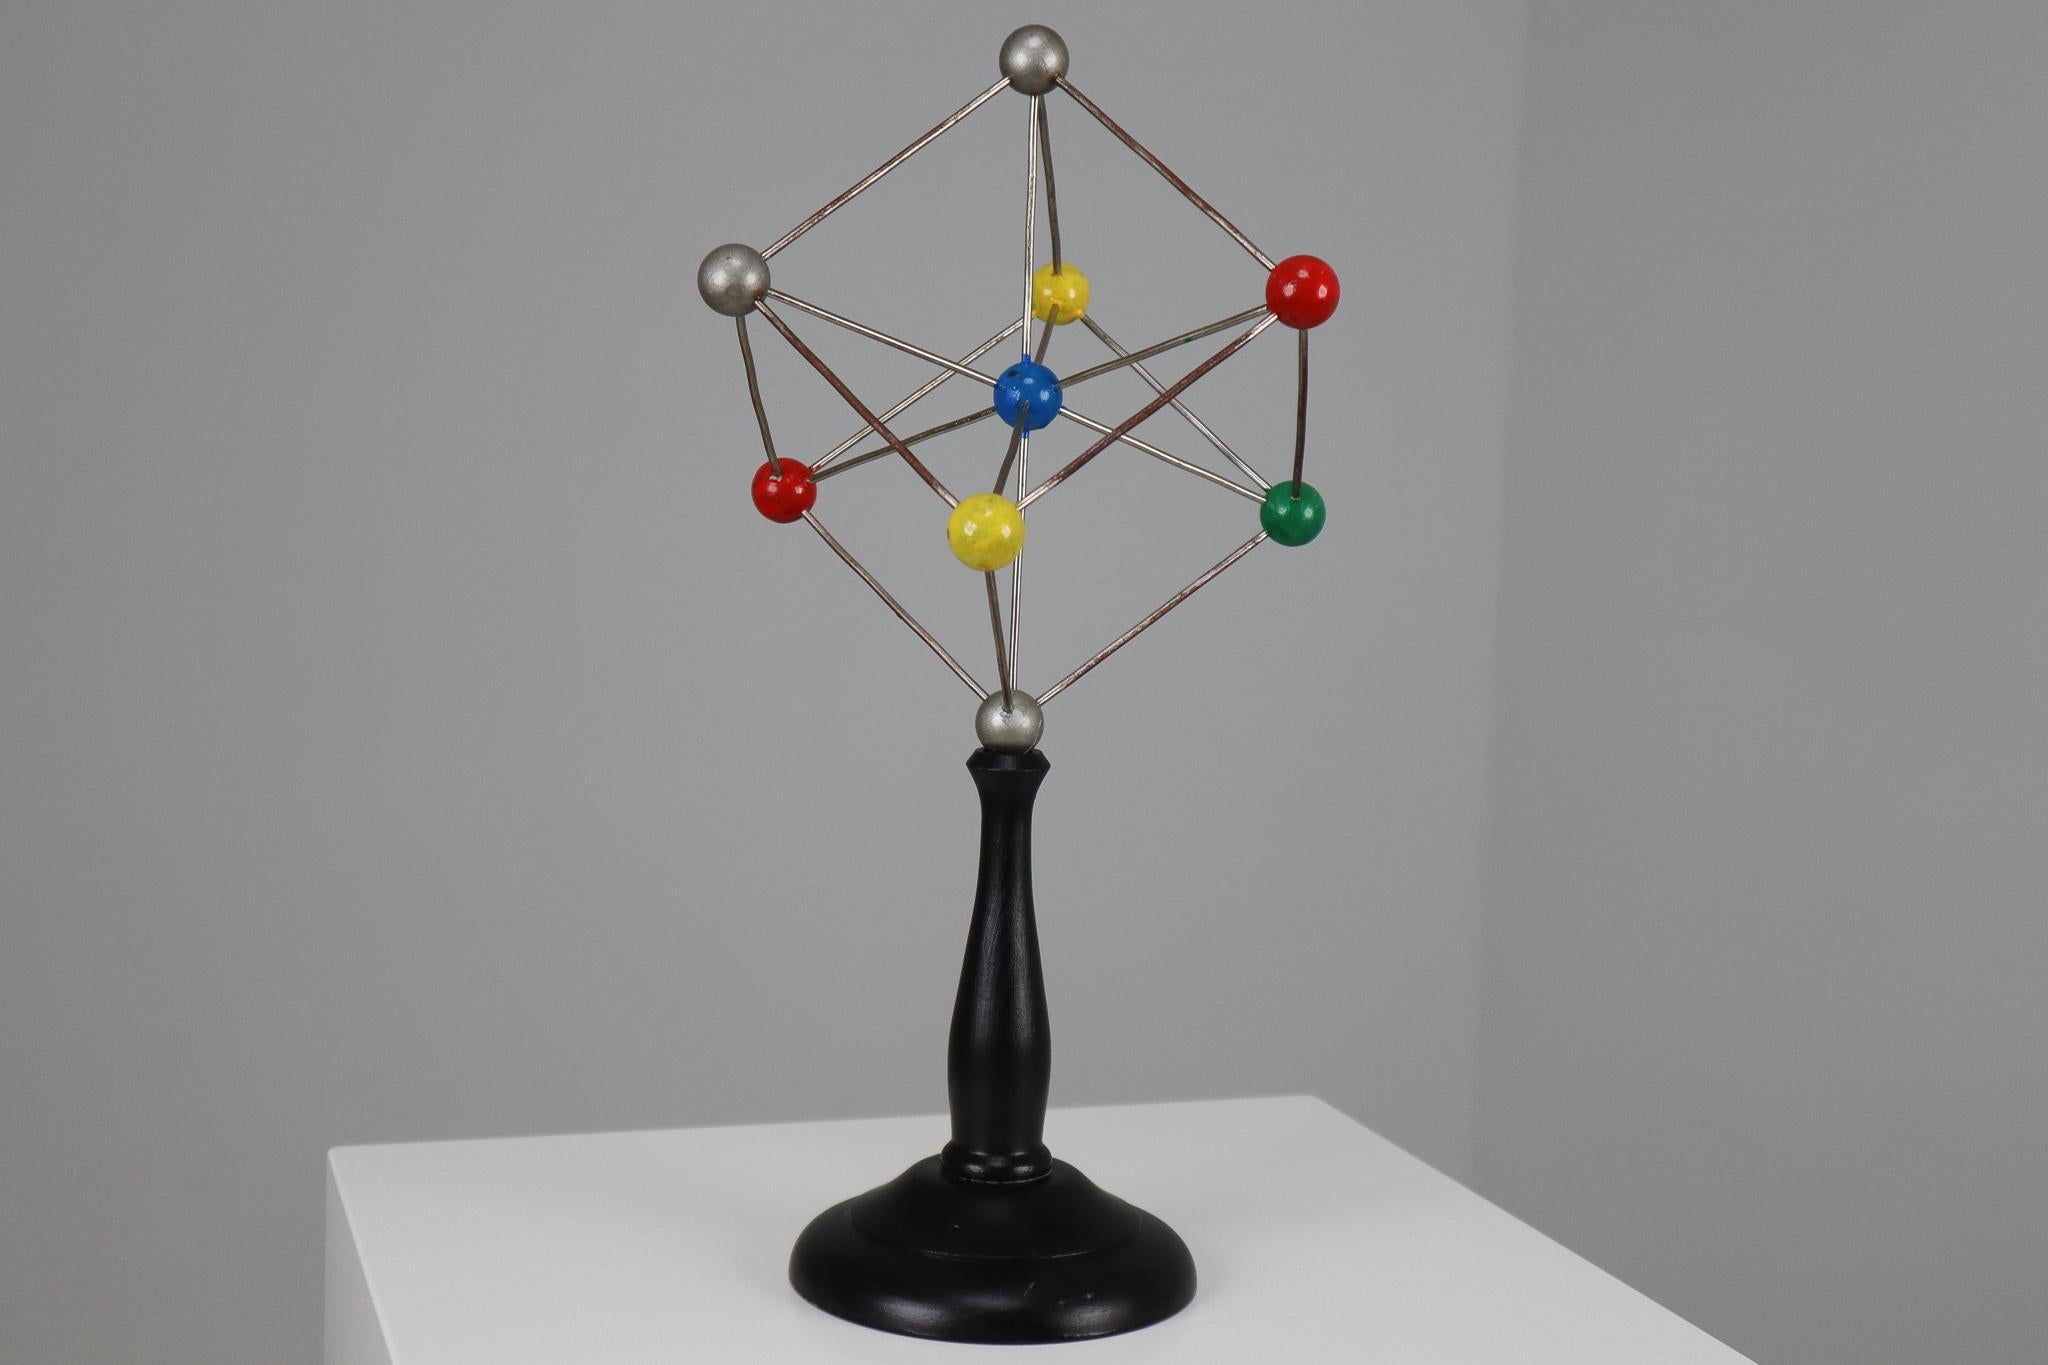 Mid-century decorative ball-and-spoke scientific crystal model from Czechoslovakia from the 1950s. Made for educational reasons, used for classroom demonstration and study. In good condition with signs of age and patina.